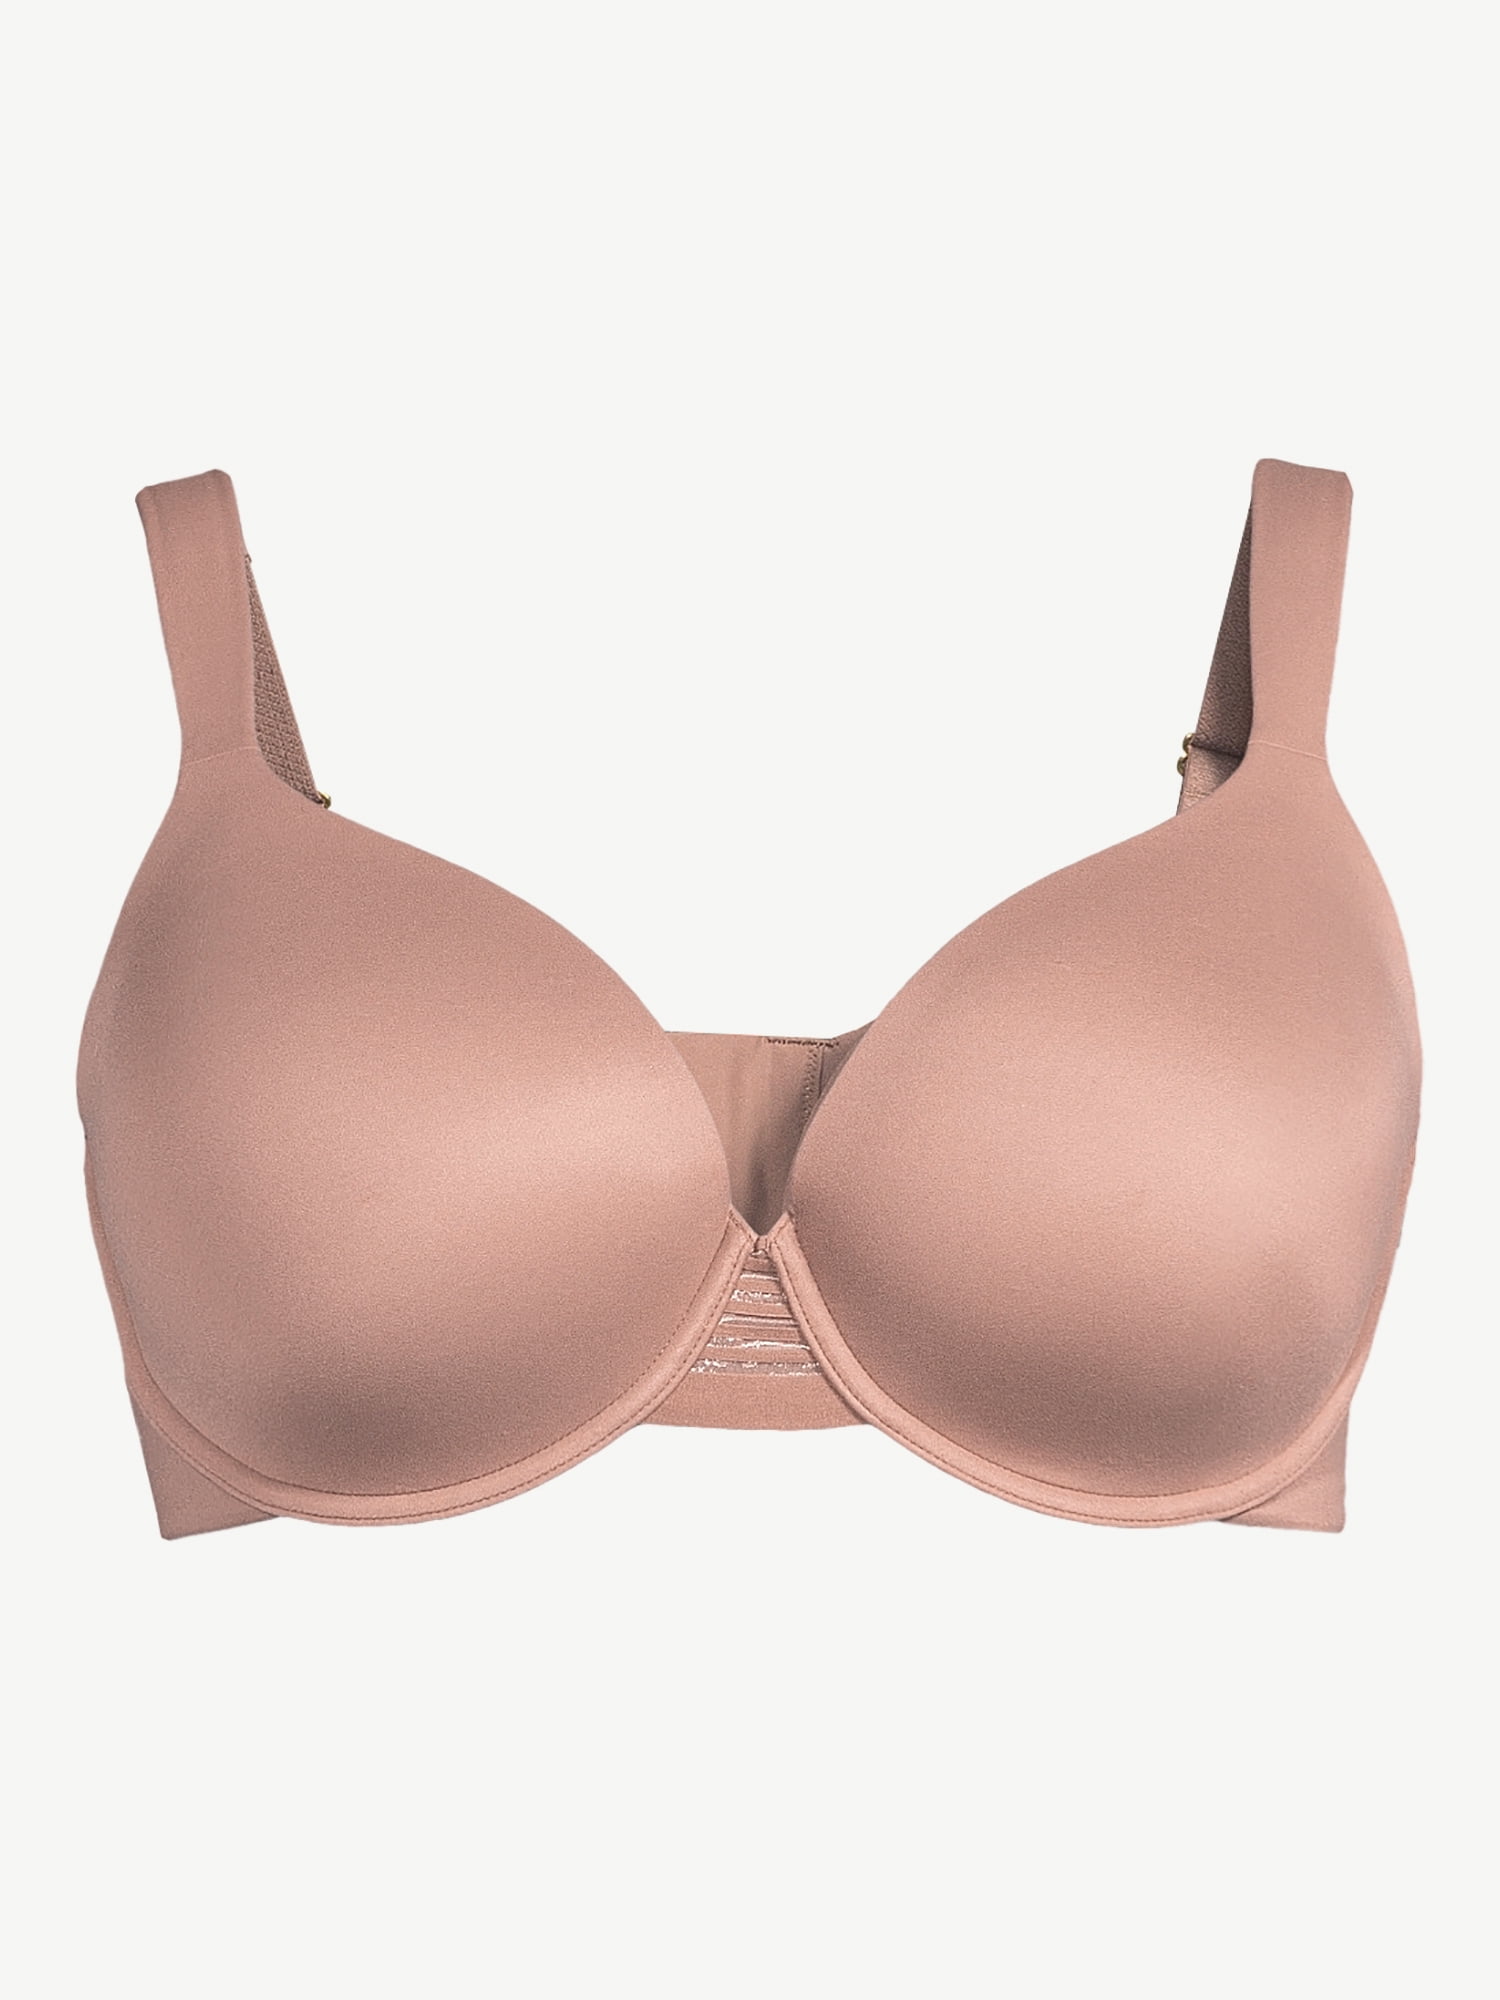 46ddd Bras, On sale bras include plus size bras with different